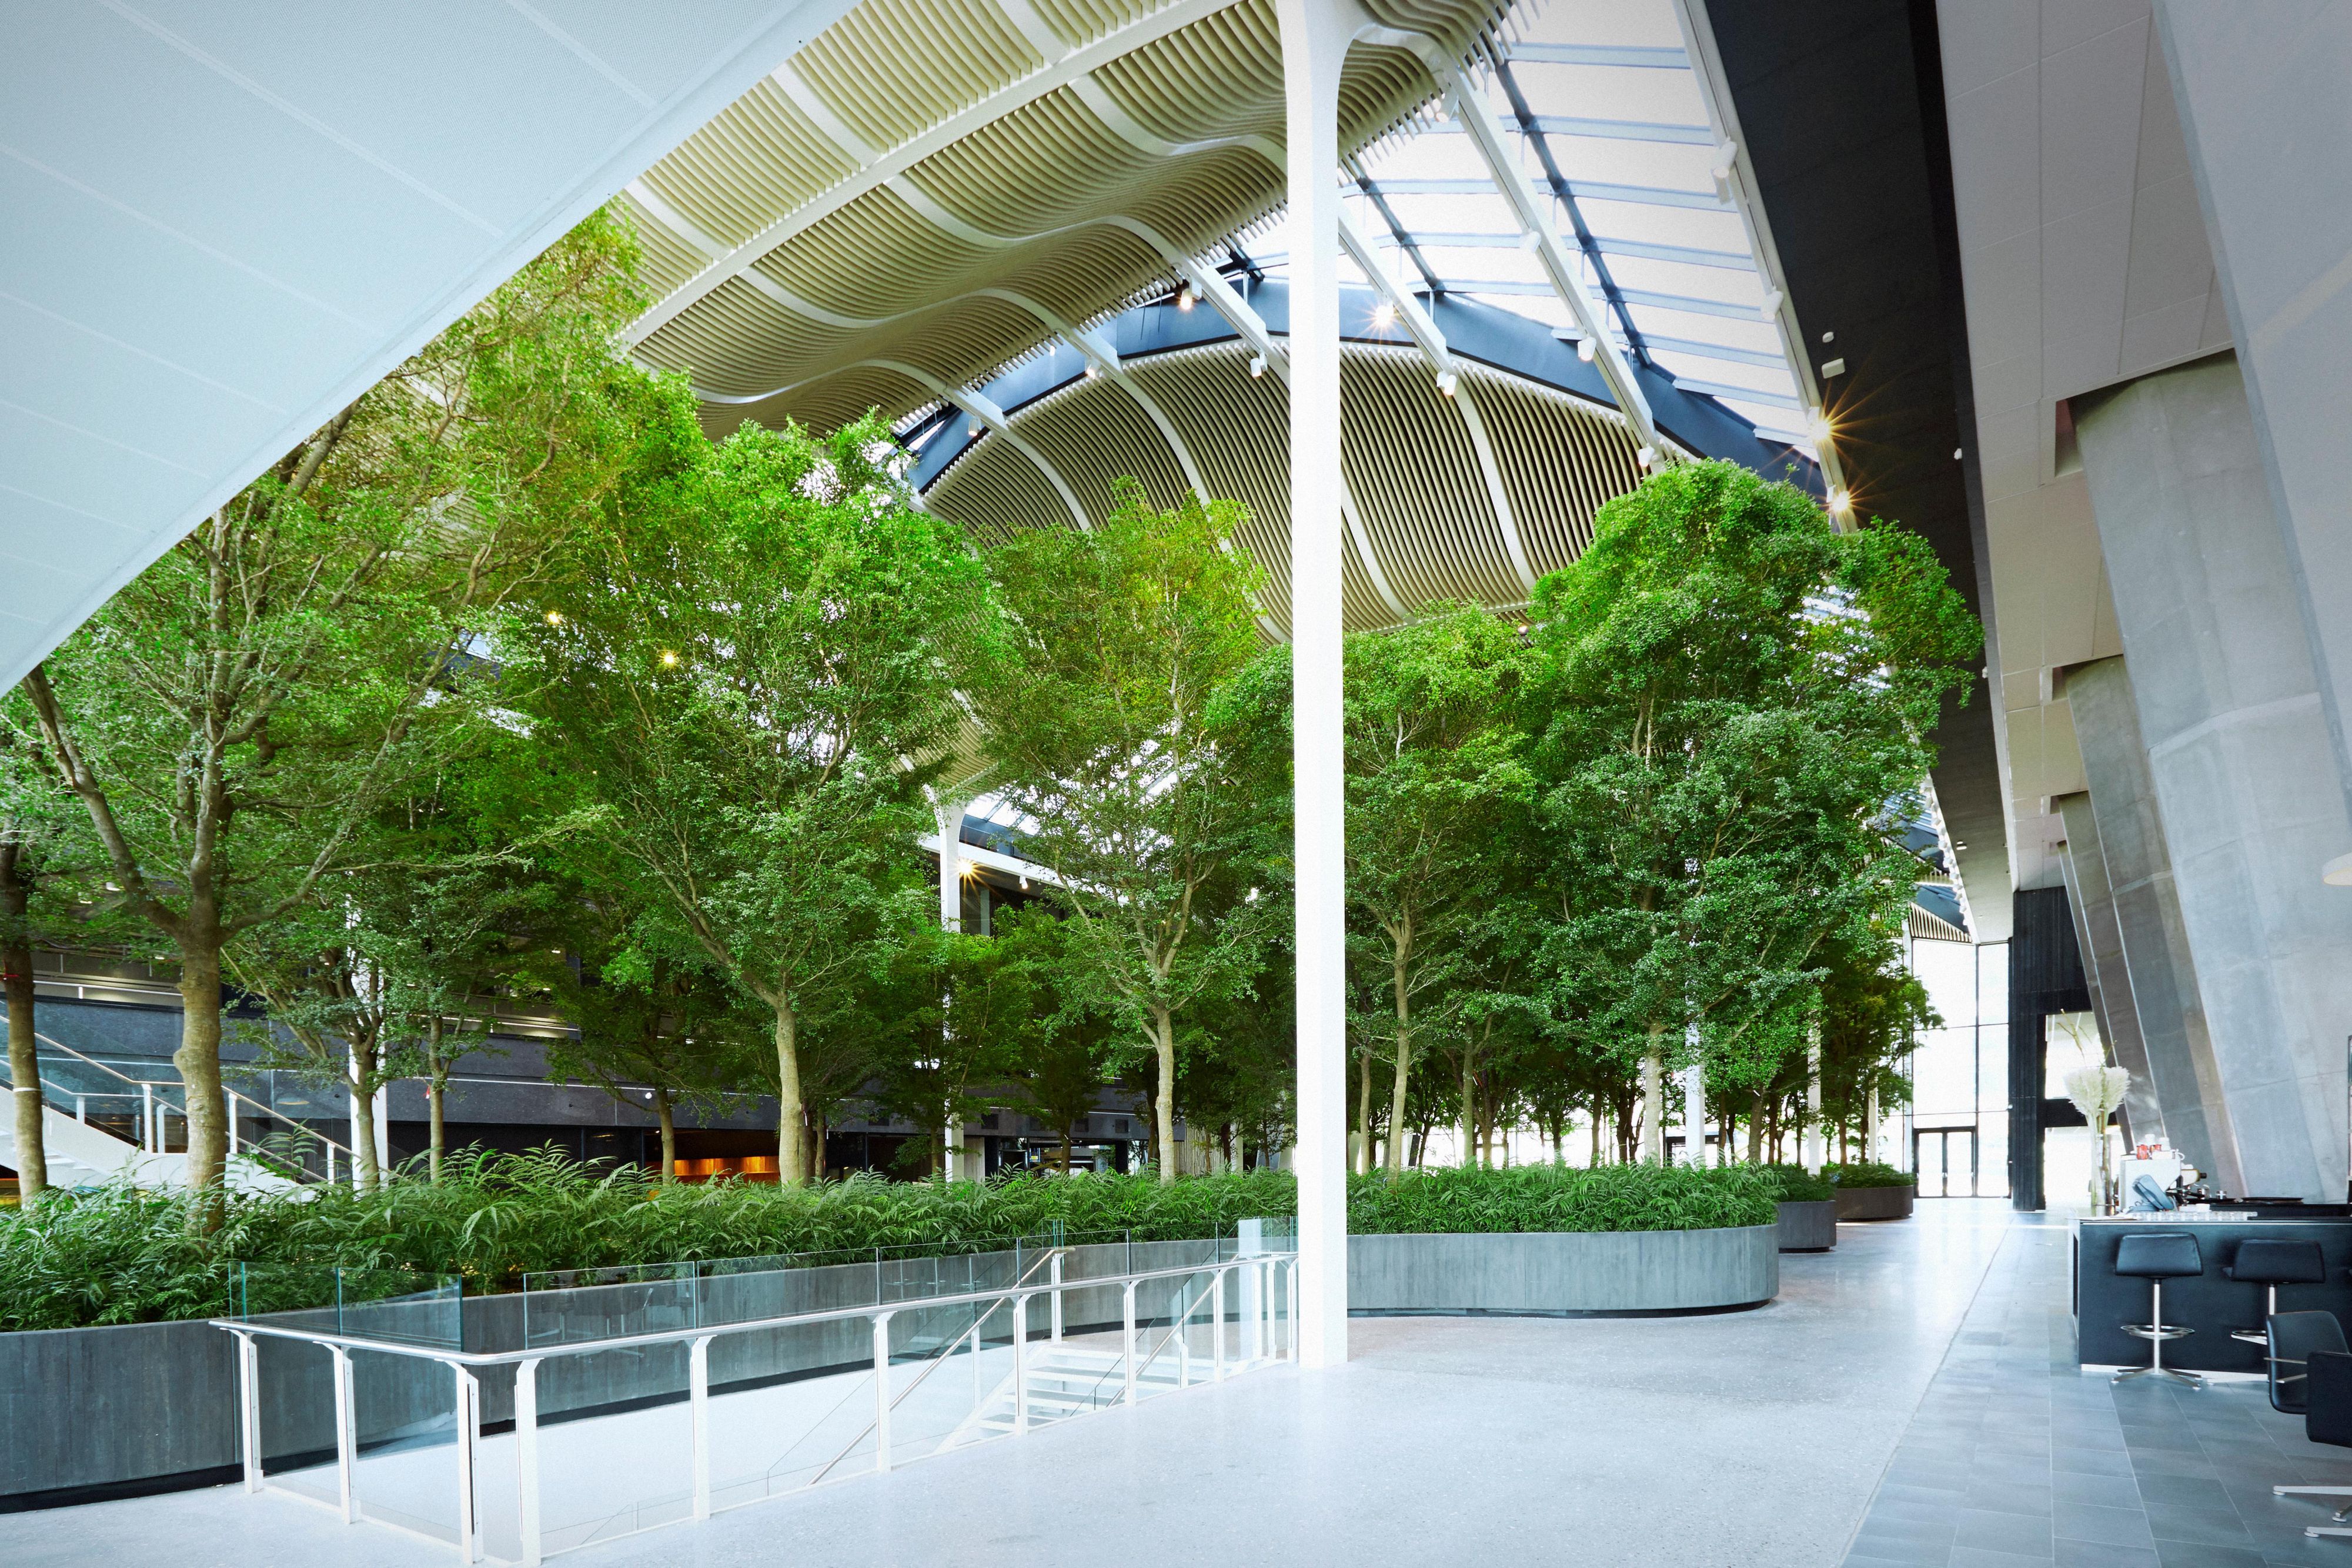 Our Atrium is 1,400 sqm with 60 trees and 4500 plants